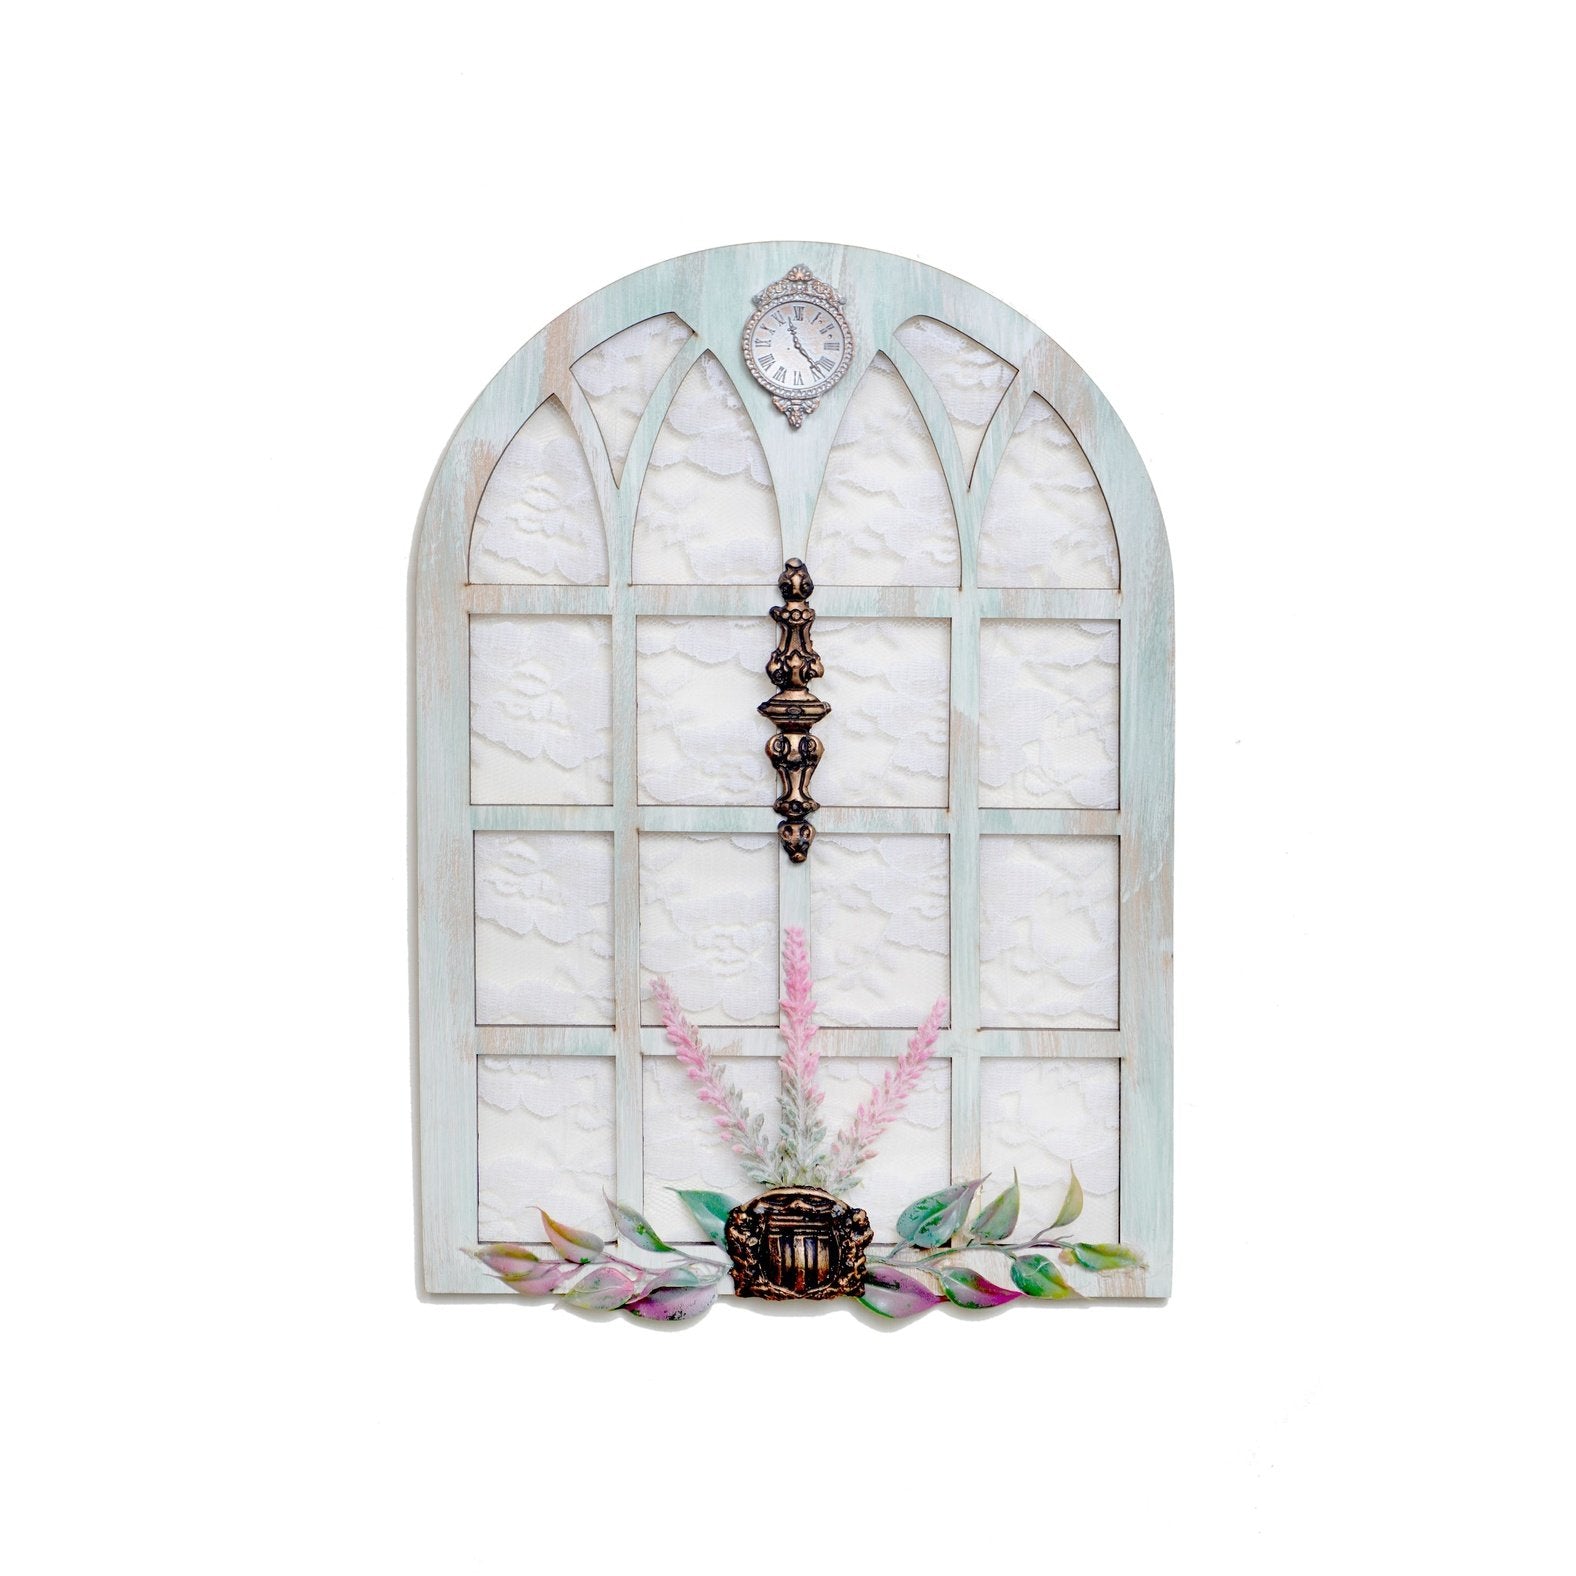 3D Window Wall Art With Net Lace With Flowers, Leaves, and Vintage Sings Wemy Store